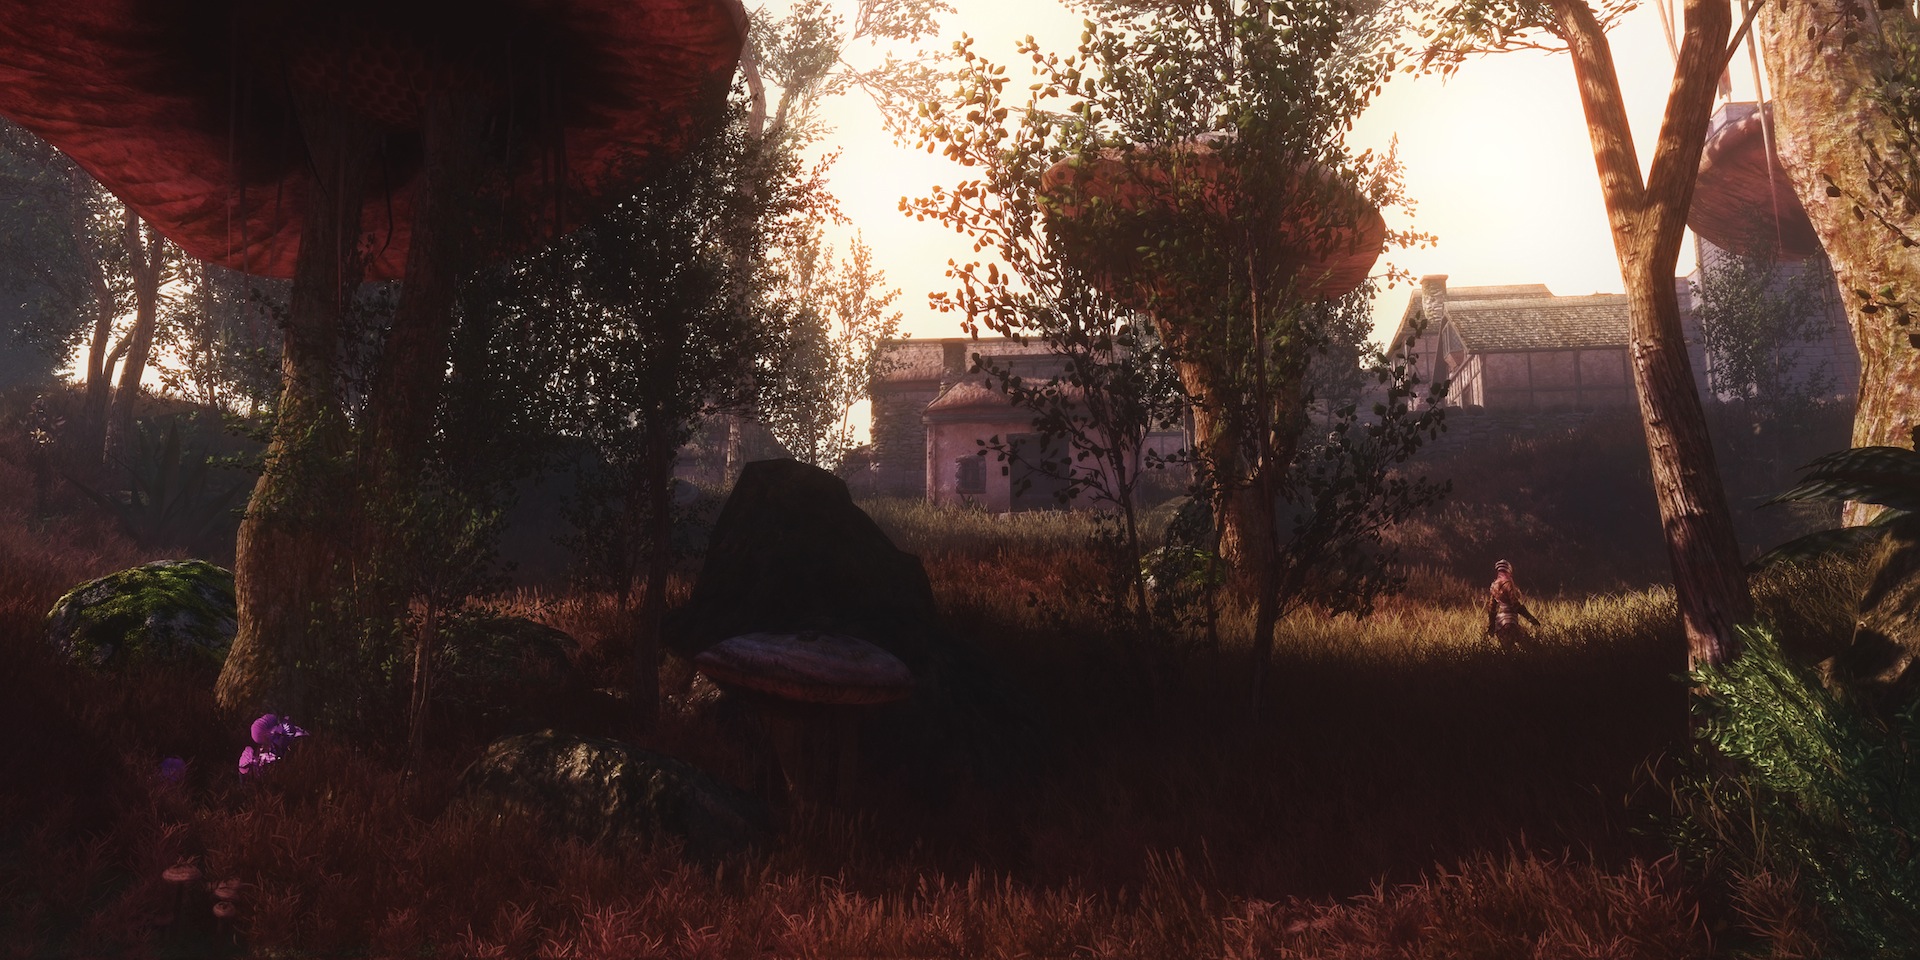 High-Res Skywind Looks Like The Morrowind Mod Of My Dreams